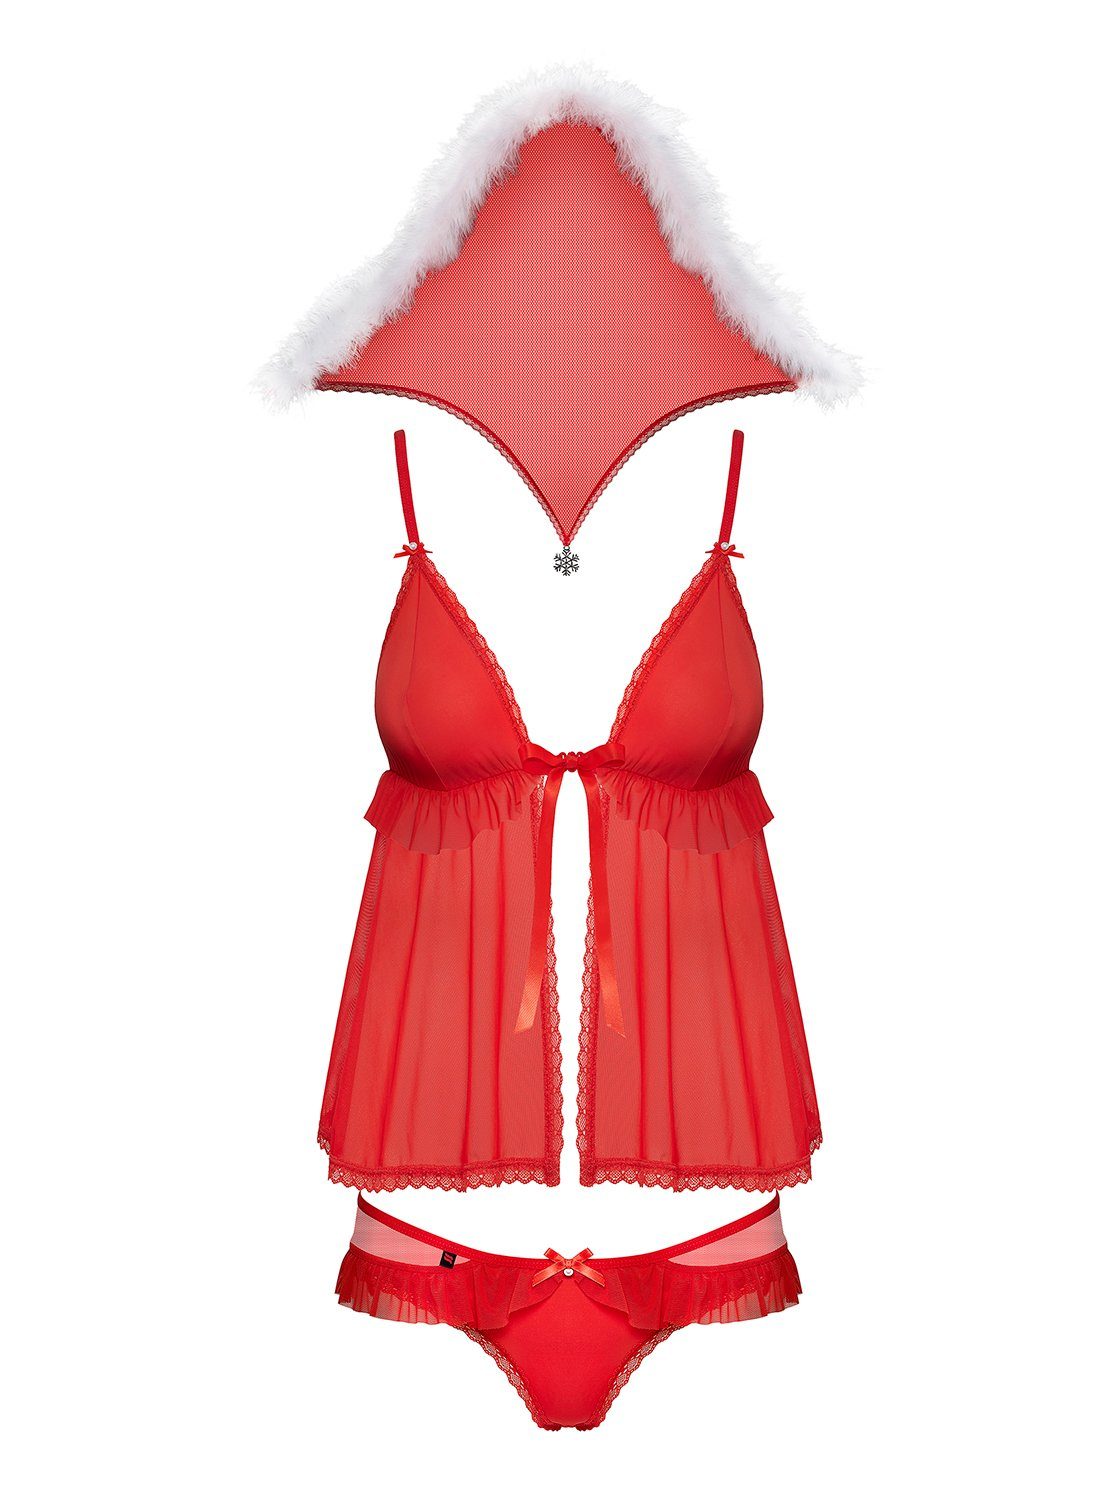 in Made mit Kapuze Babydoll EU 3-tlg. Weihnachtskostüm Xmas-Outfit Negligé Obsessive